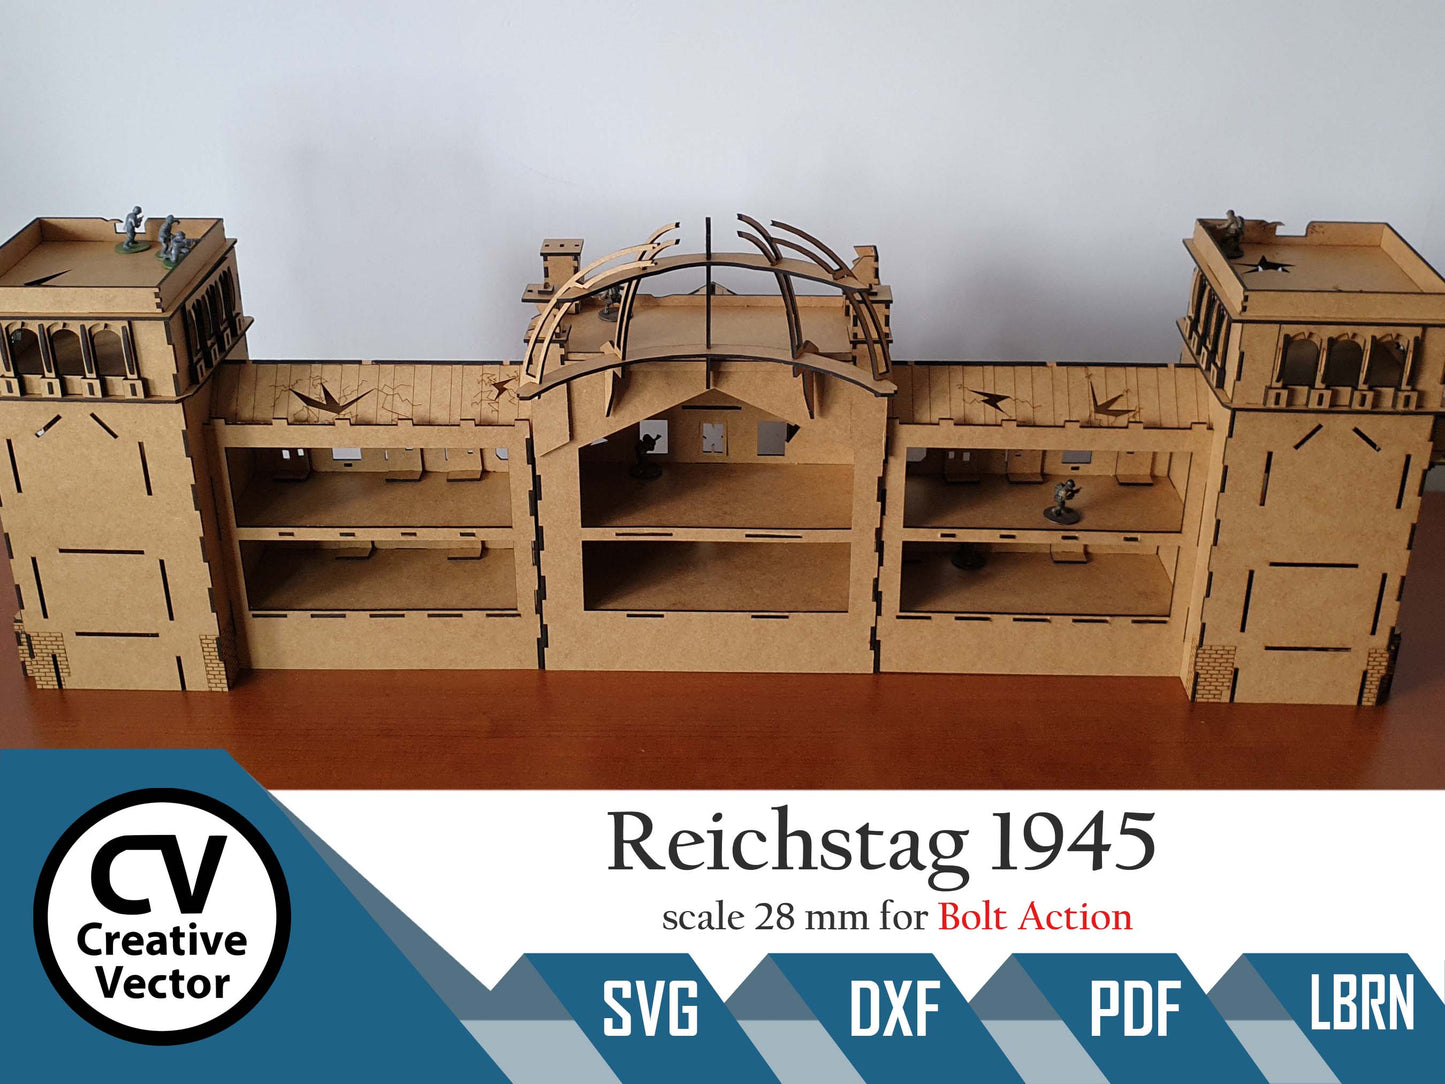 Reichstag 1945 in scale 28mm for game Bolt Action